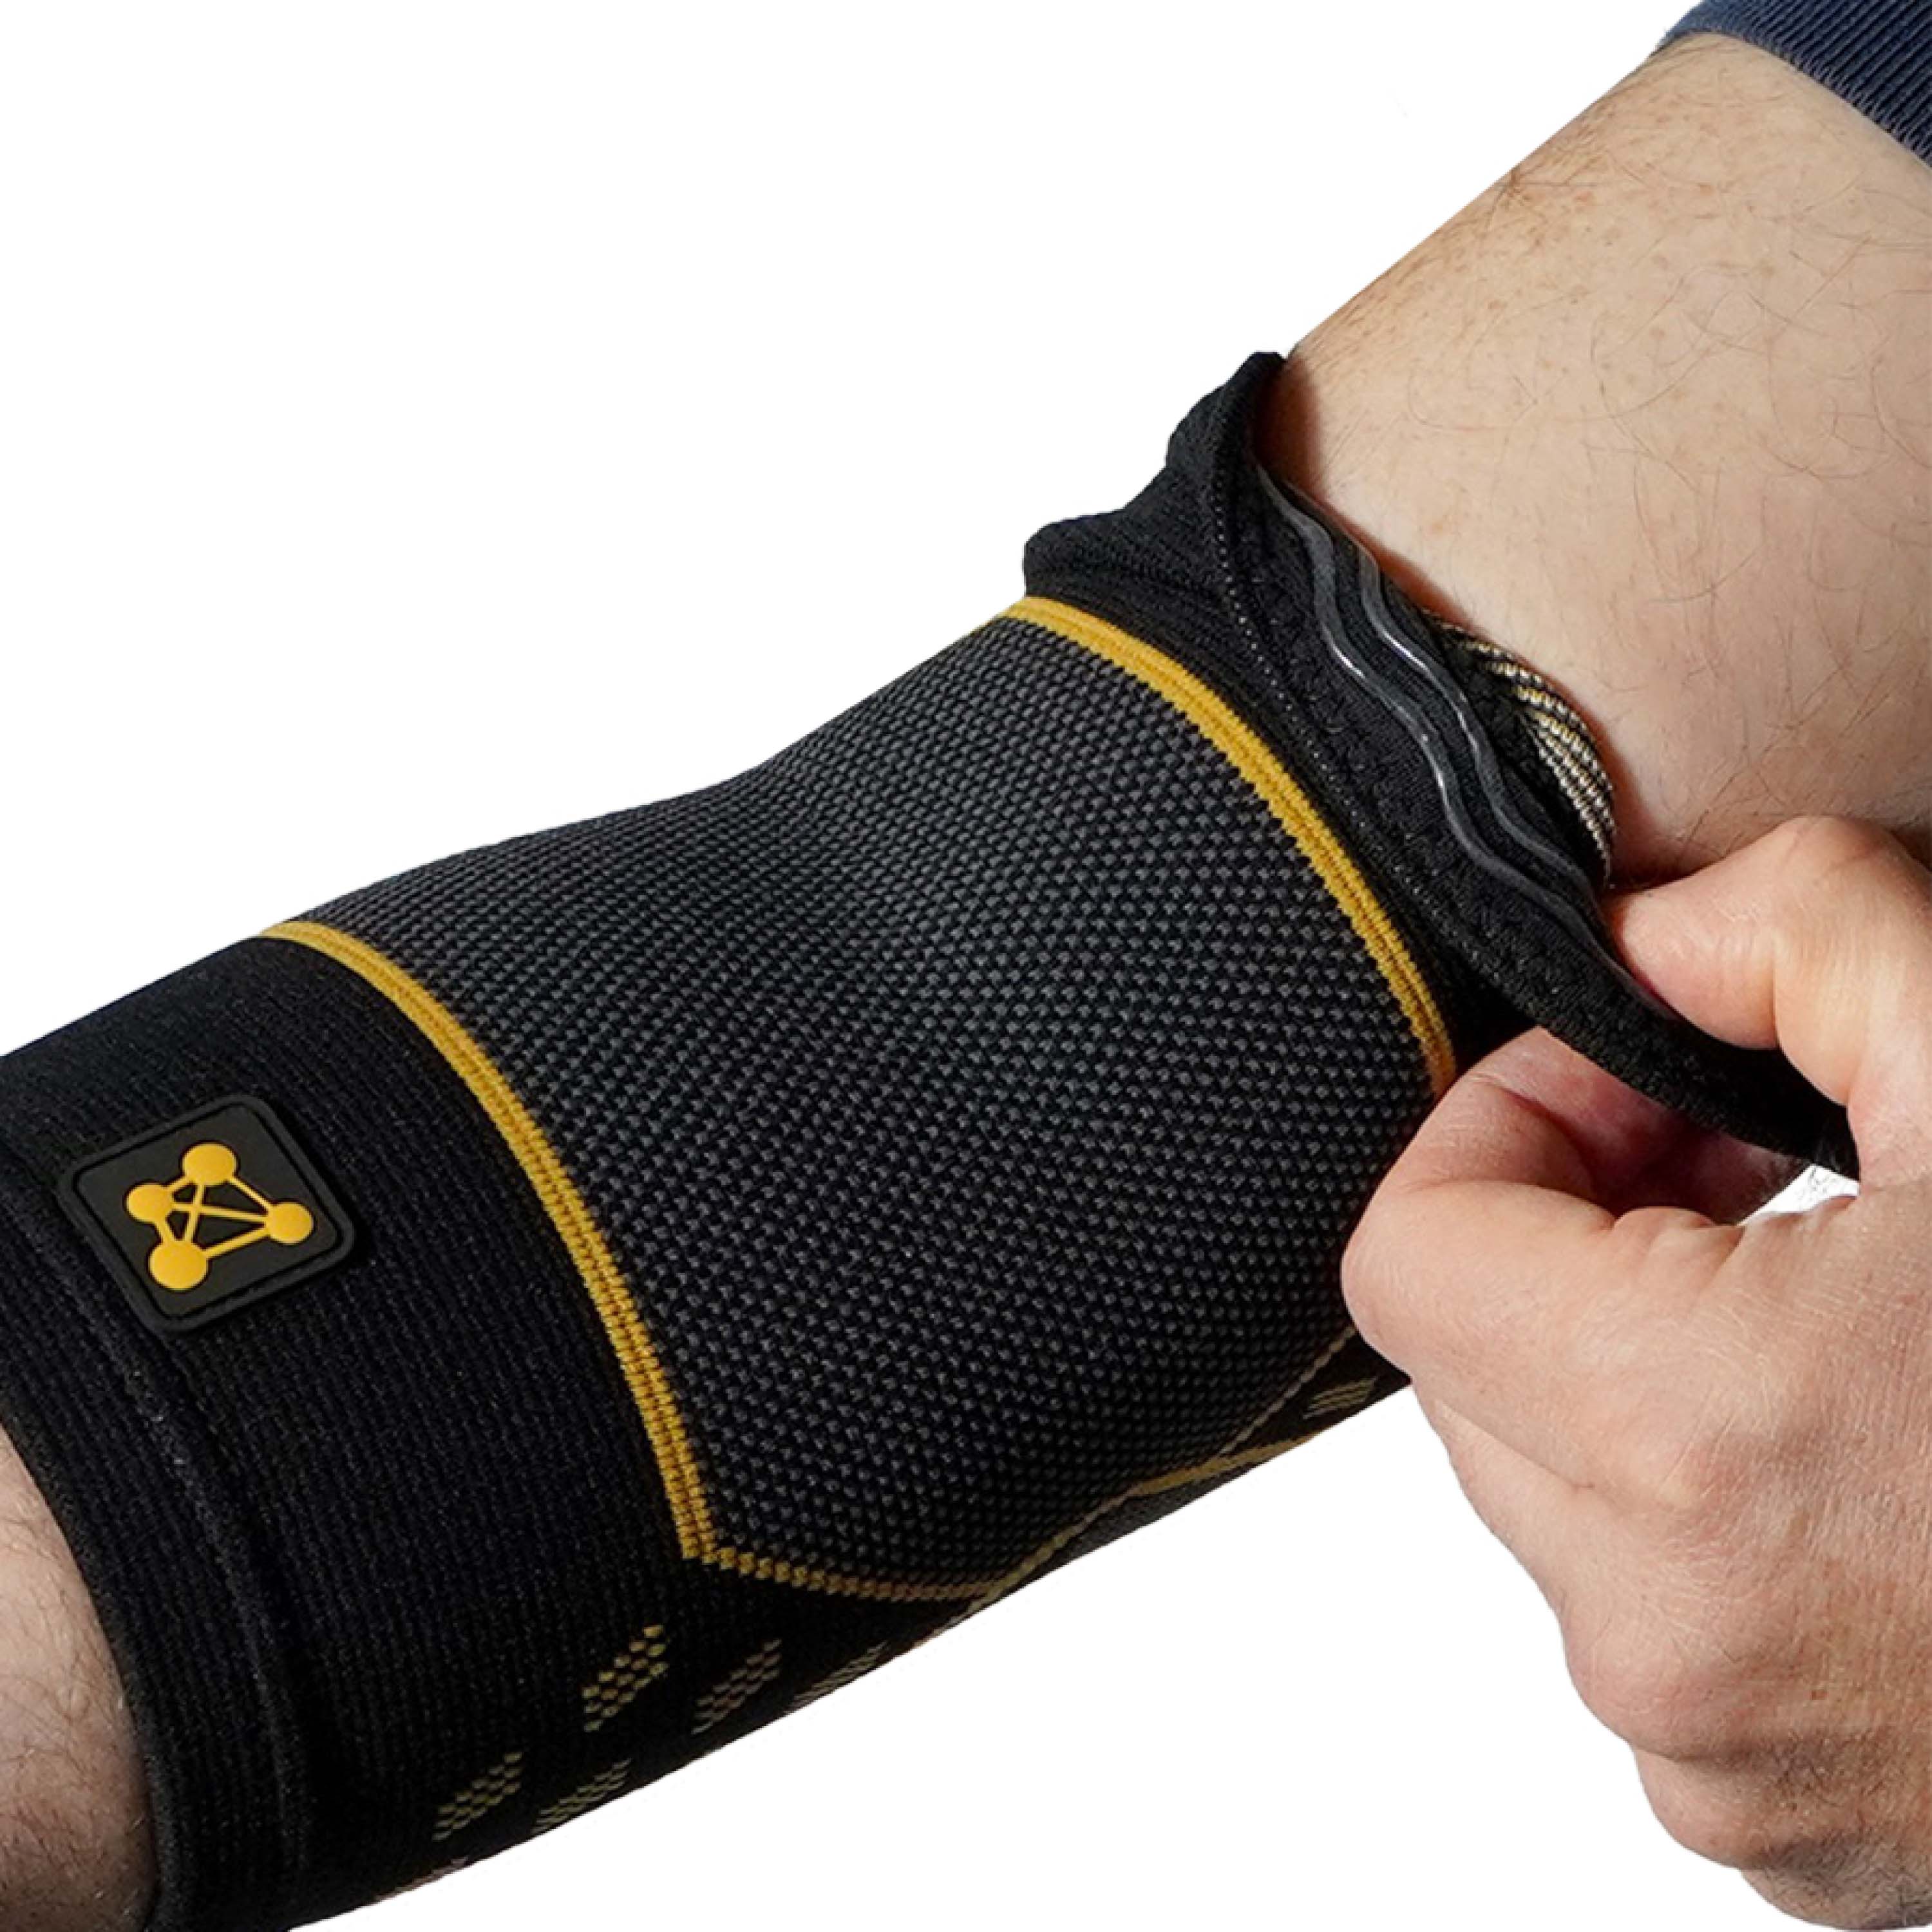 CopperJoint Releases New Elbow Compression Sleeve